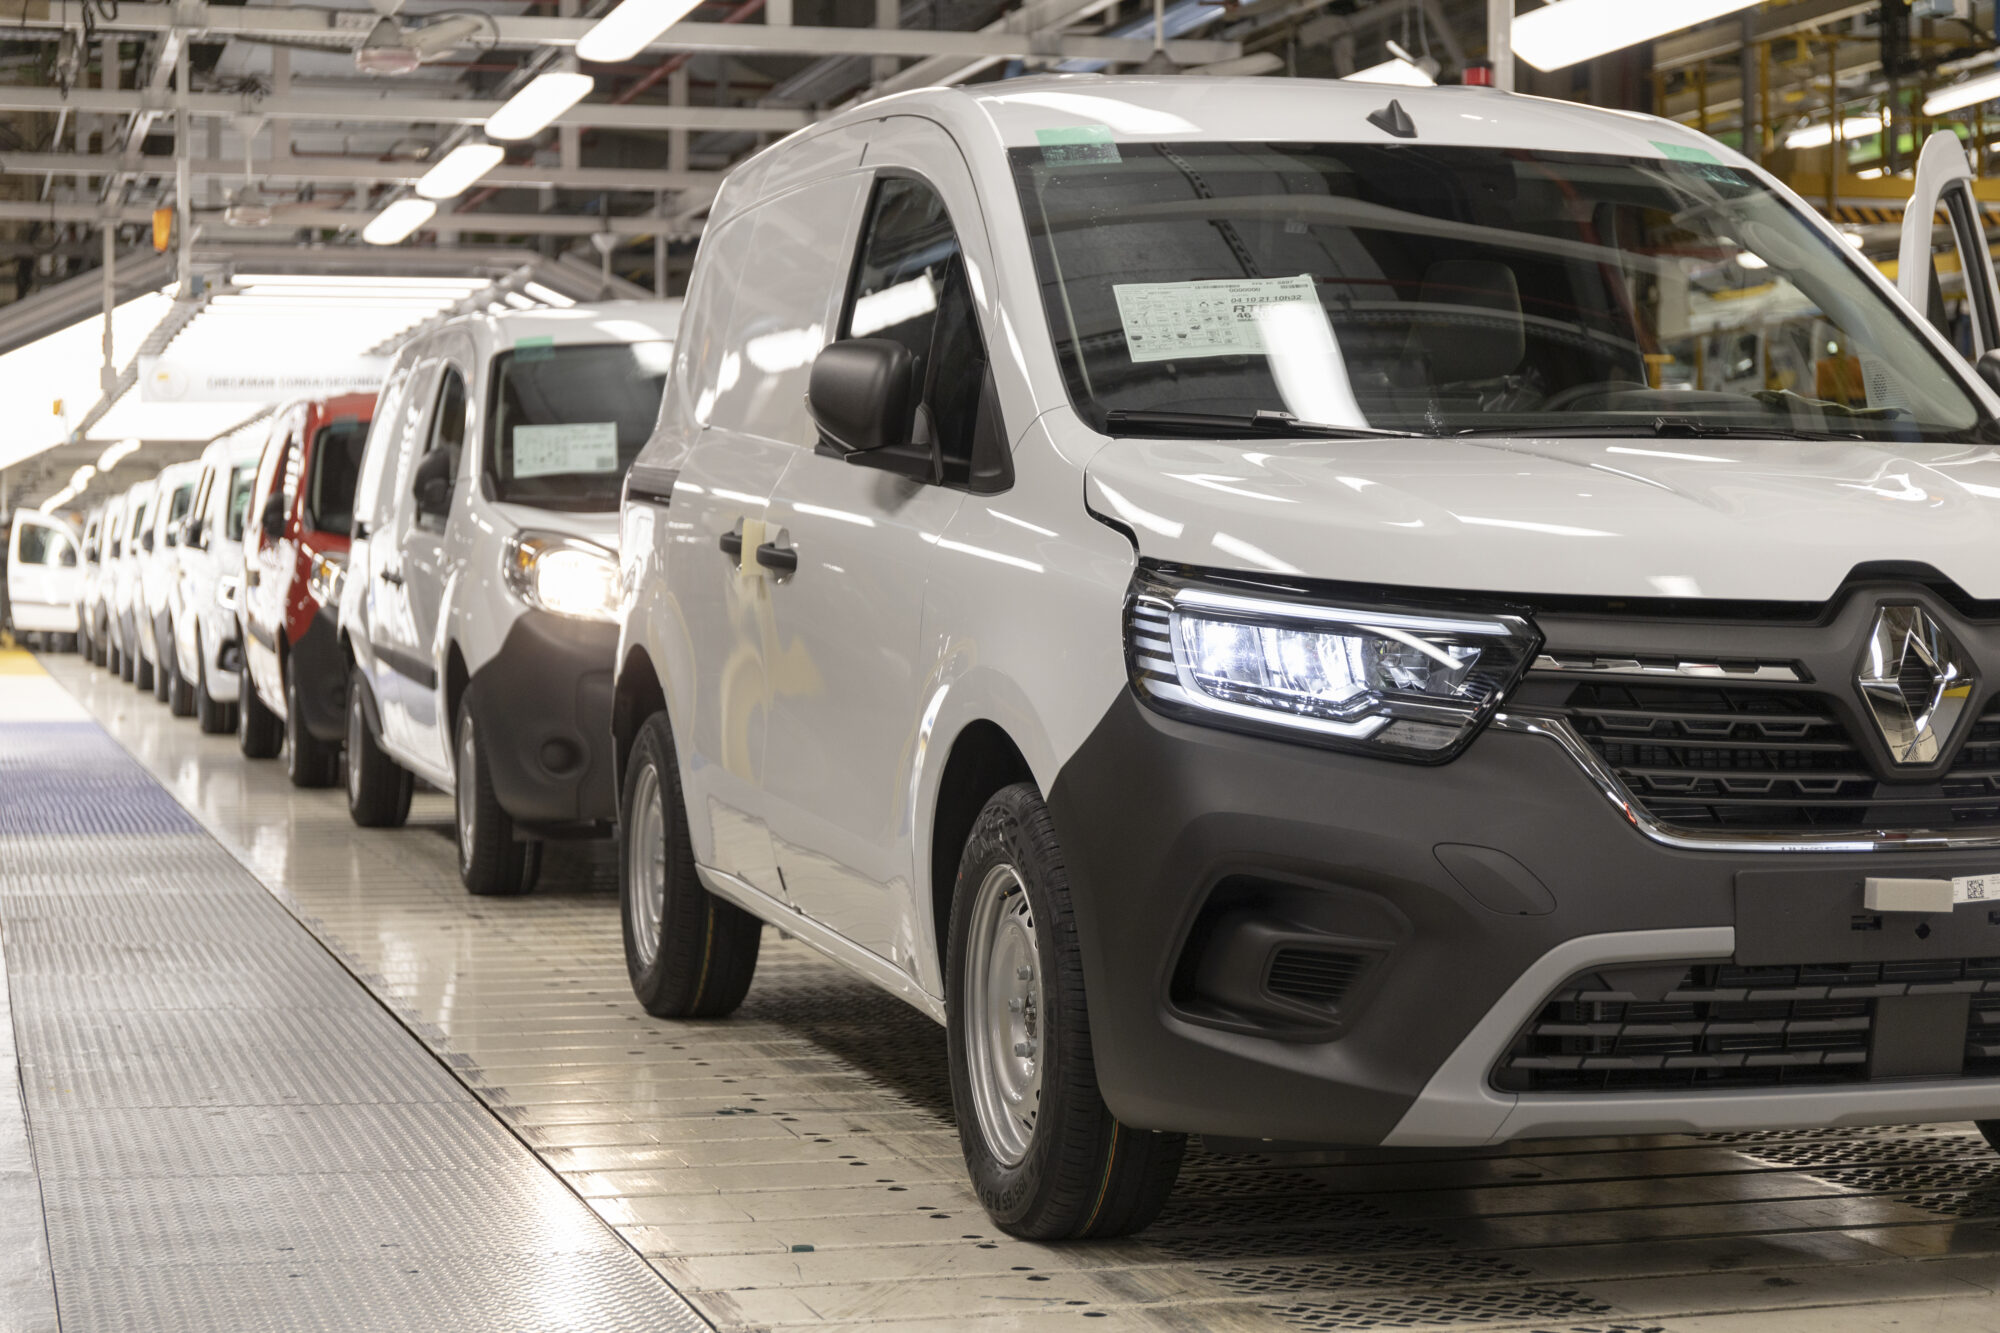 2021 - Story Renault Group - The Maubeuge Factory: Excellence as a Trademark.jpeg